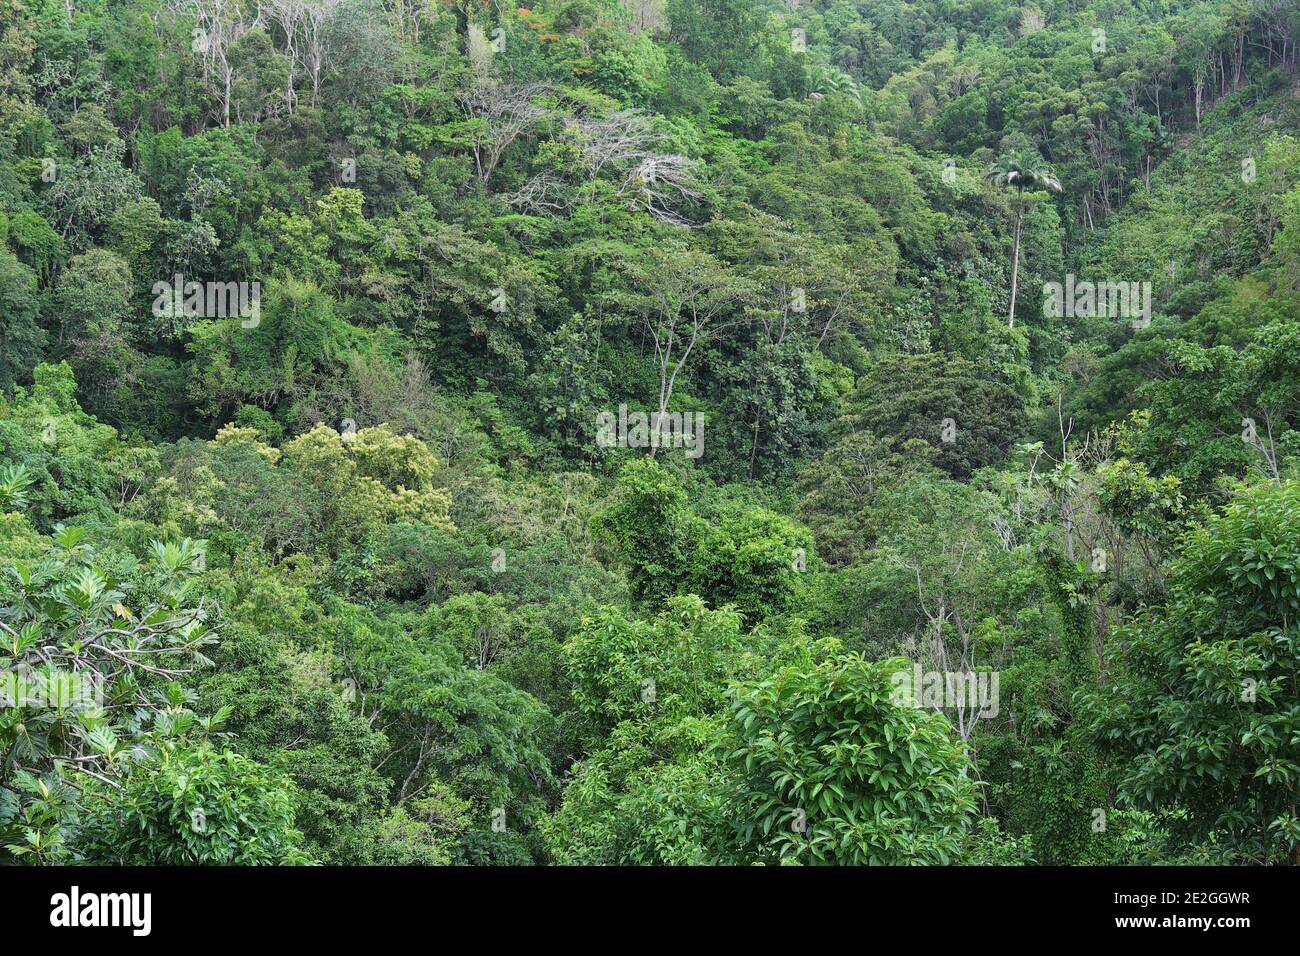 Guadeloupe: typical vegetation of the Grands Fonds, hilly area situated on the island of Grande-Terre. Stock Photo